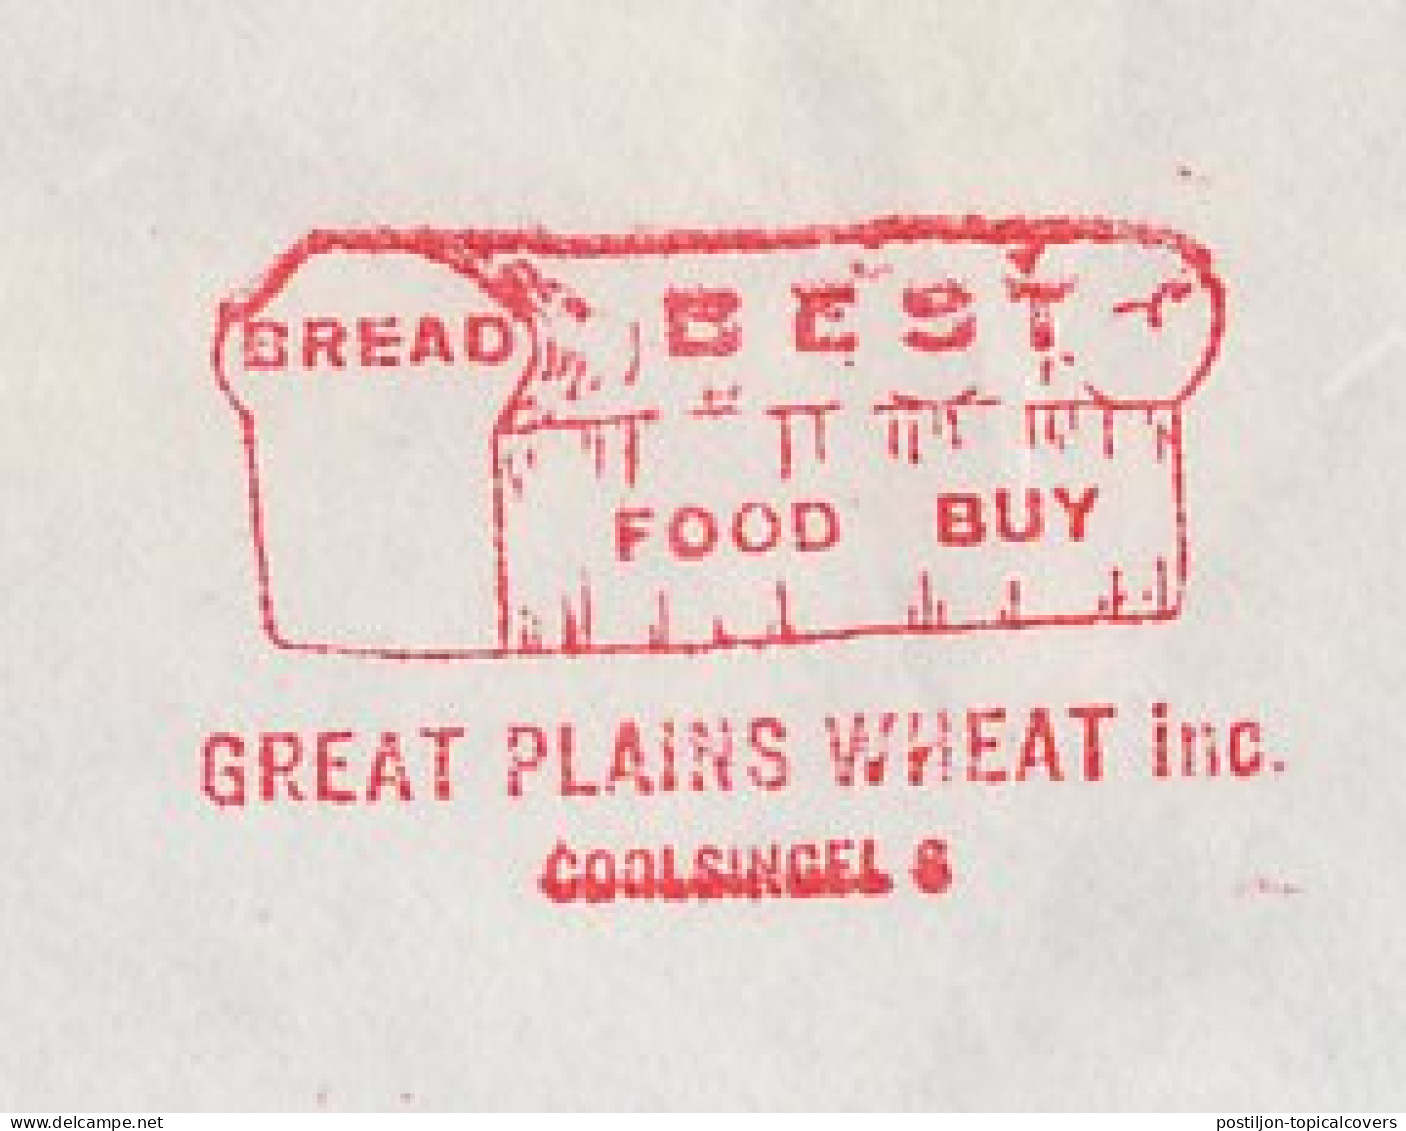 Meter Cover Netherlands 1973 Bread - Great Plains Wheat - Rotterdam - RN 530 - Alimentation